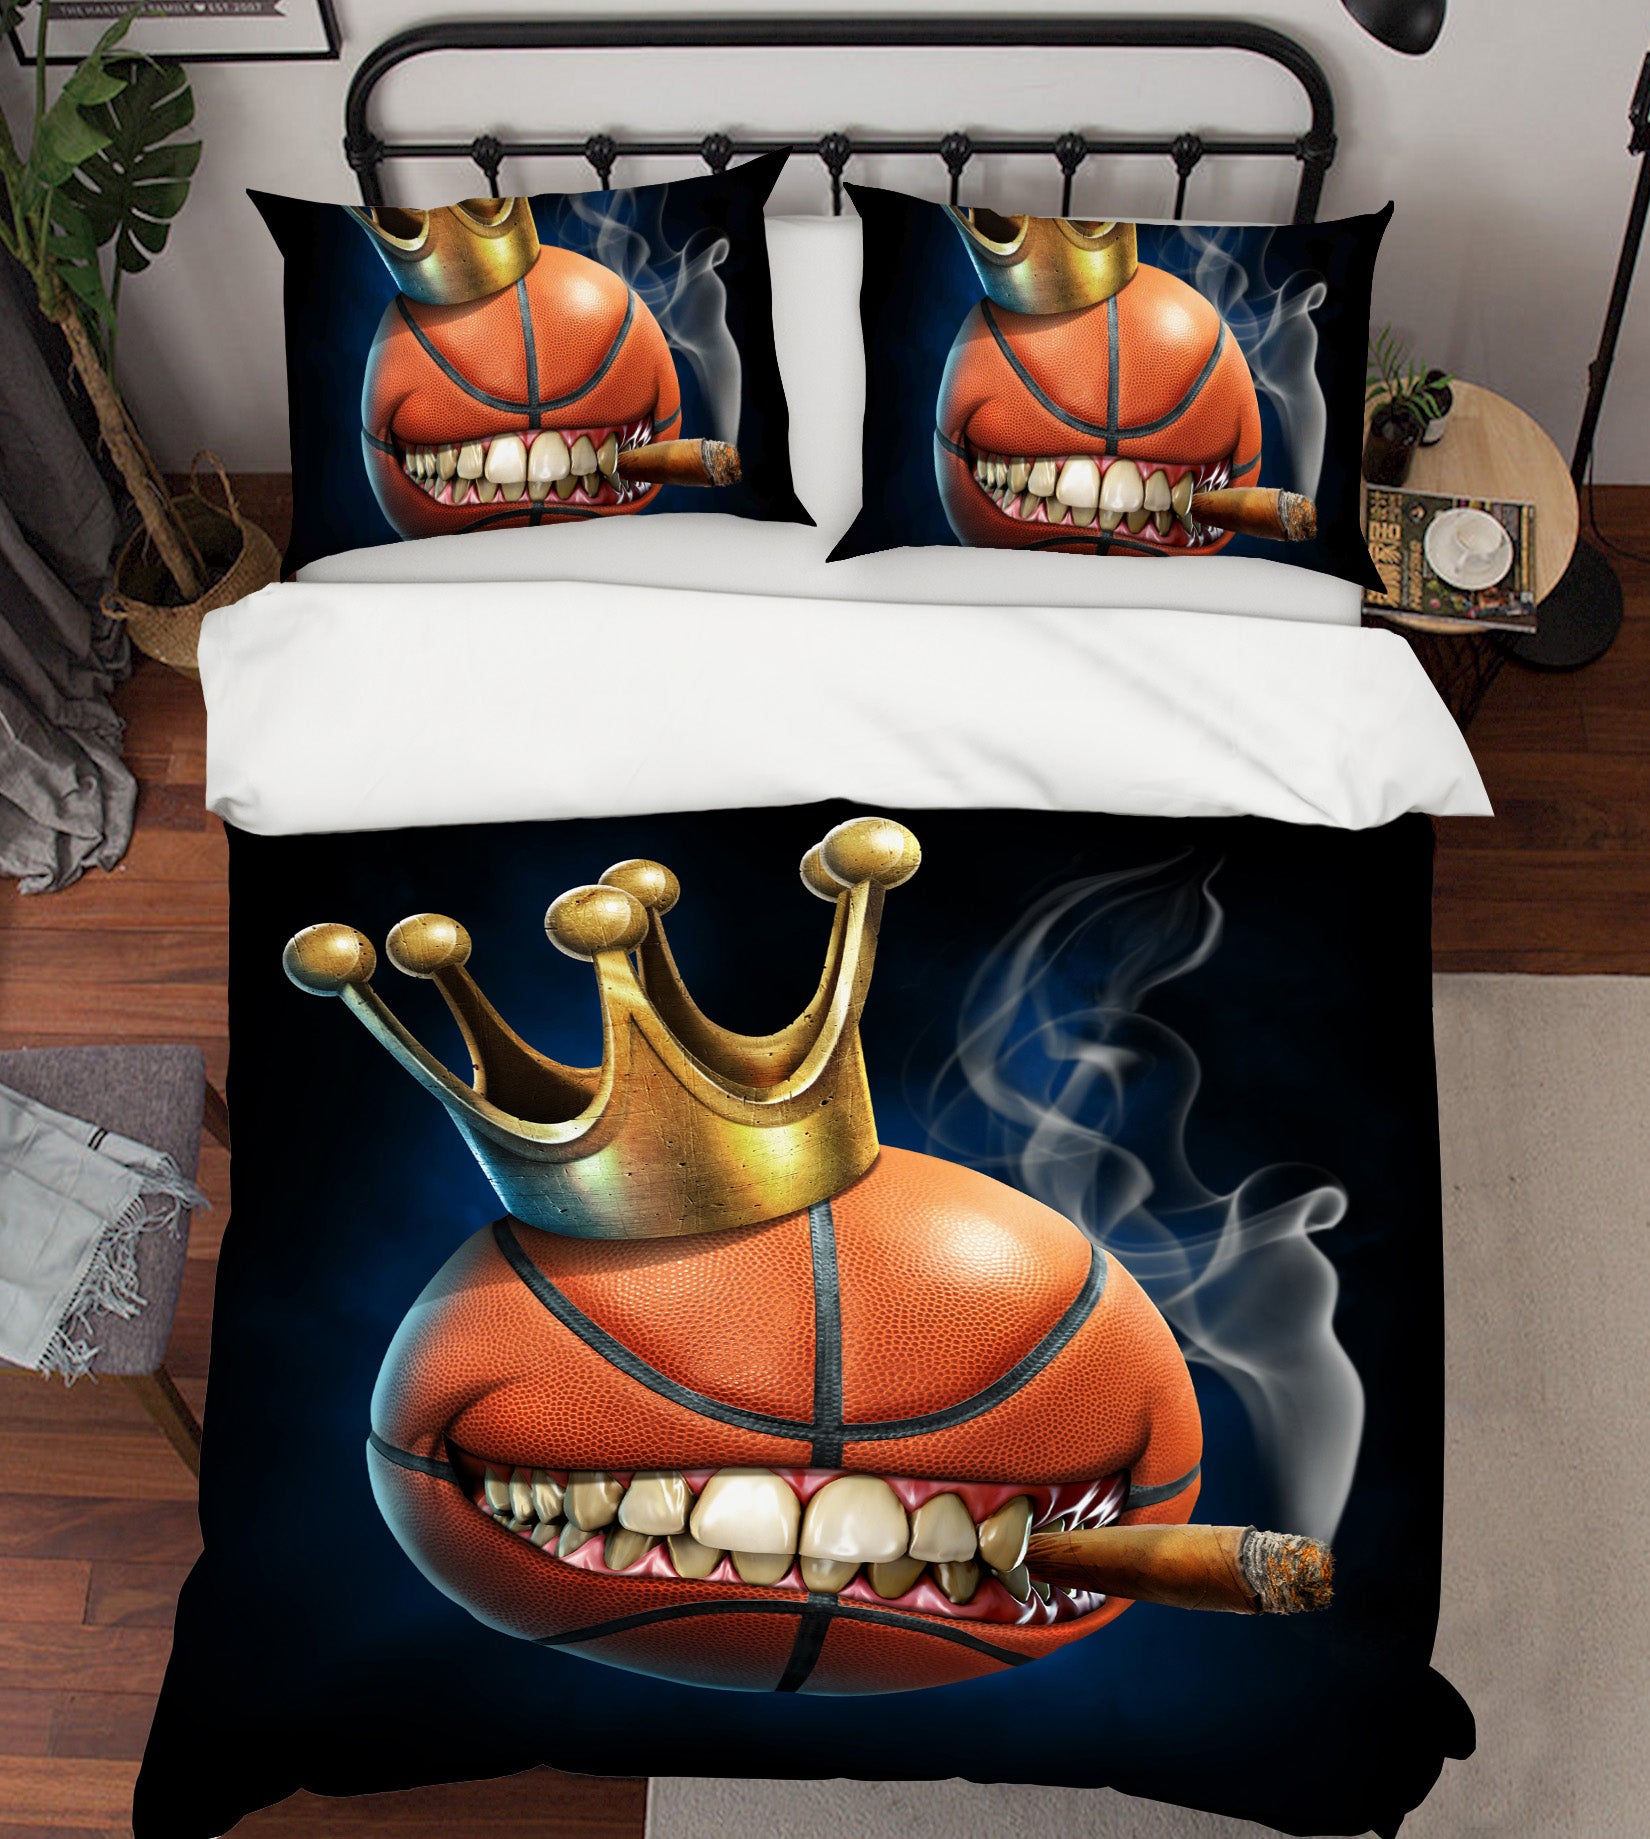 3D Basketball Tooth Smoke Crown 4052 Tom Wood Bedding Bed Pillowcases Quilt